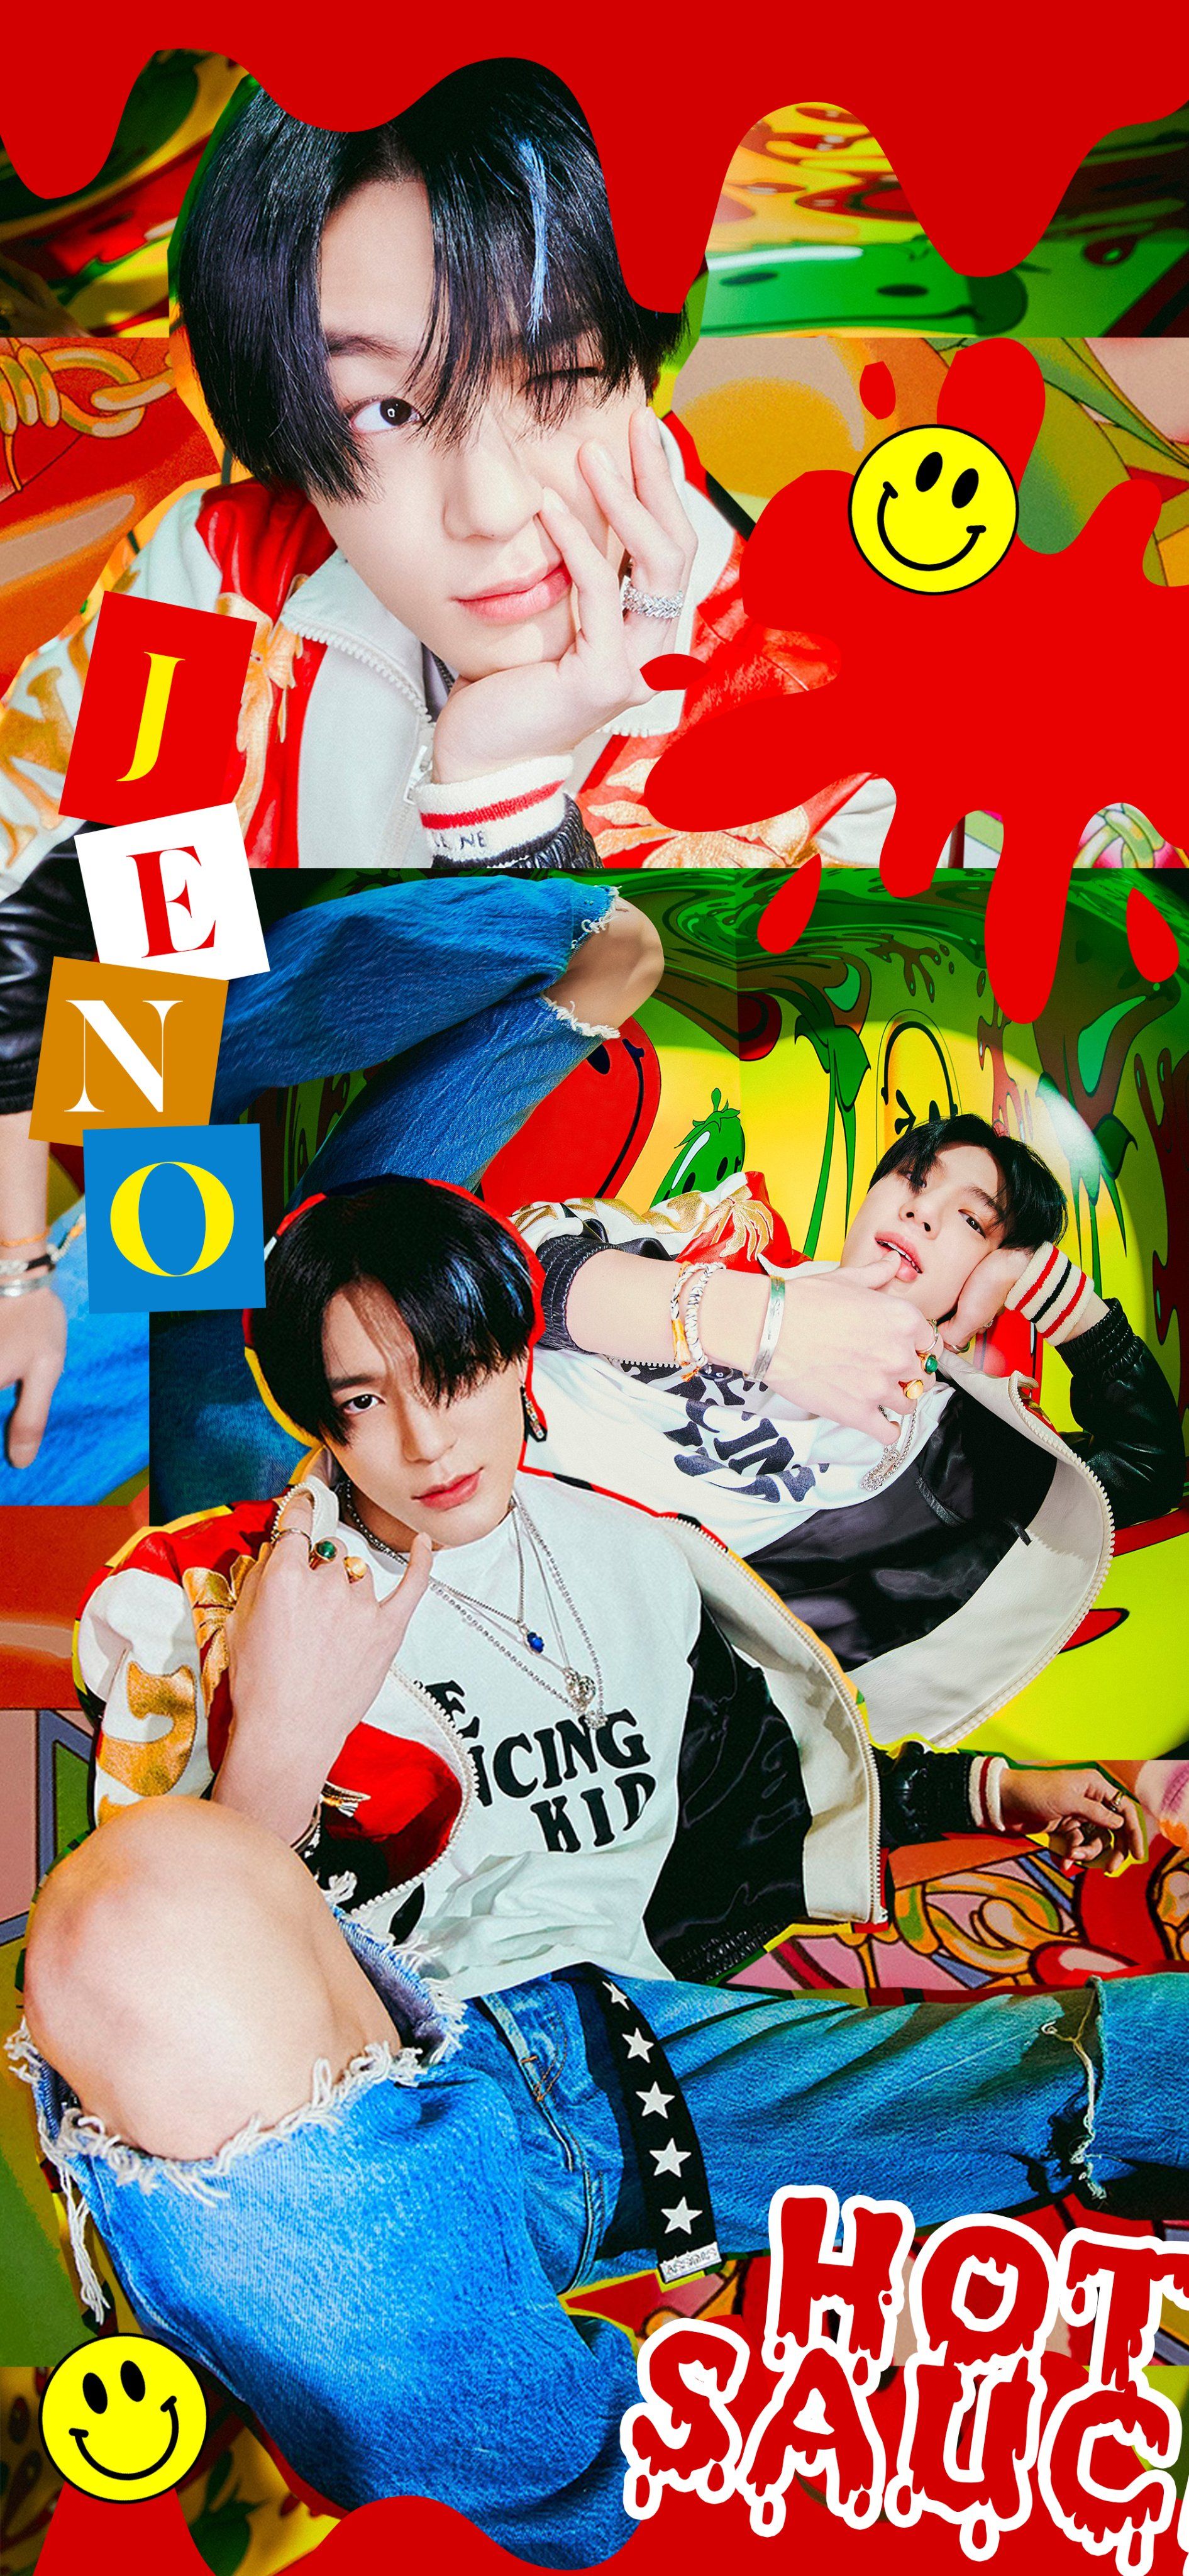 NCT DREAM WALLPAPER CRAZY JALAPENO. Nct, Nct dream, Jeno nct